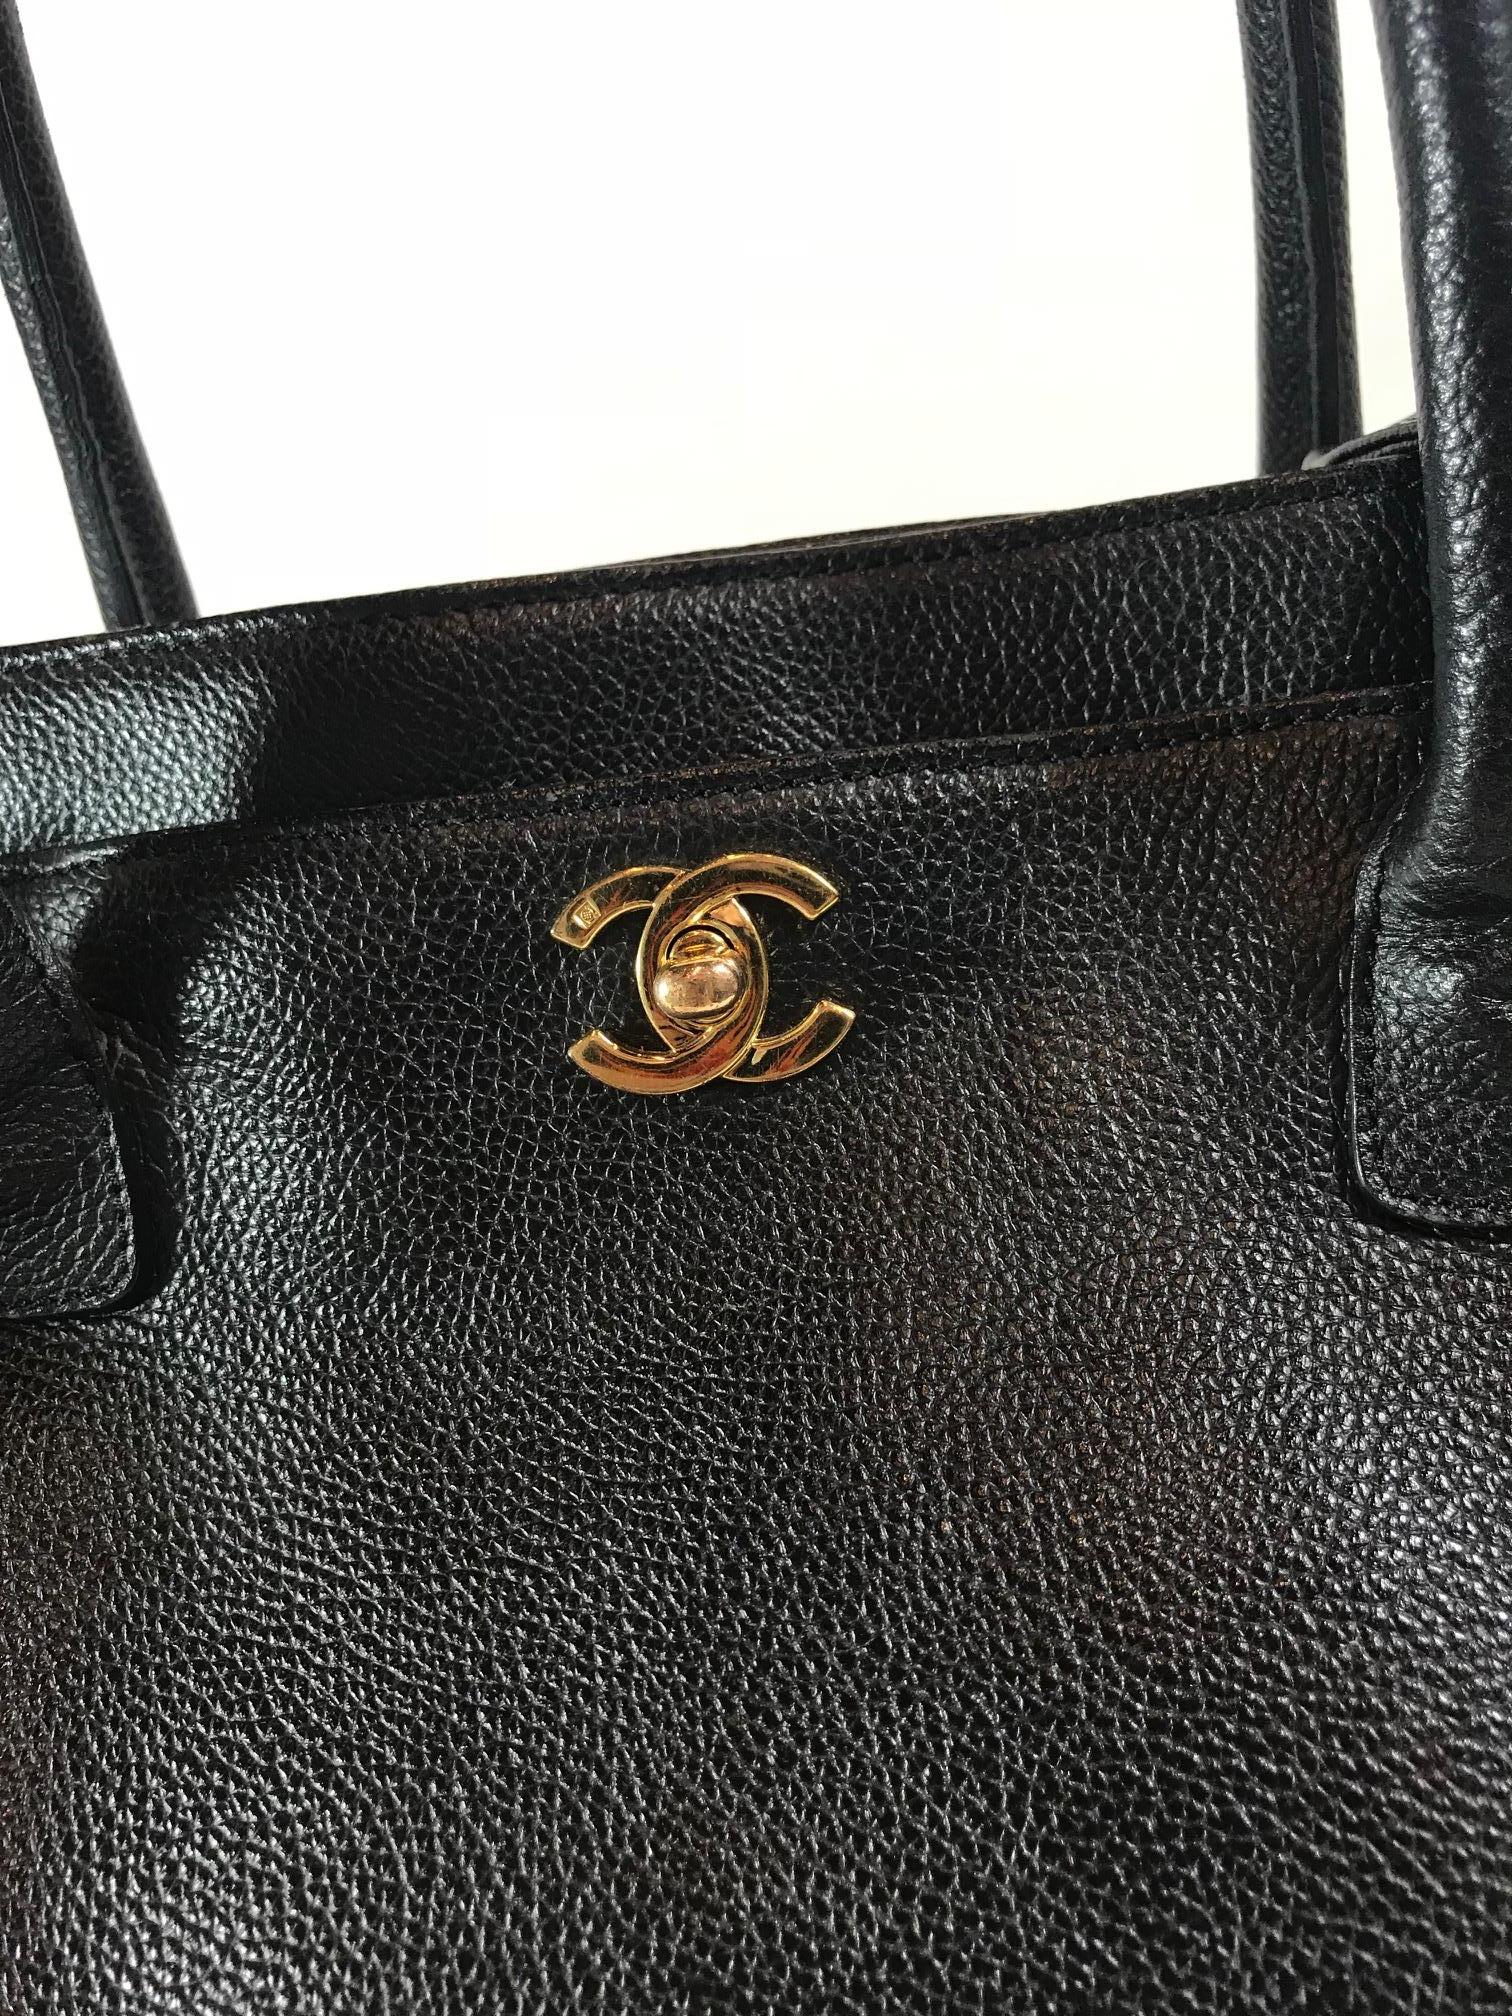 Chanel Cerf Tote w/ Strap For Sale 1